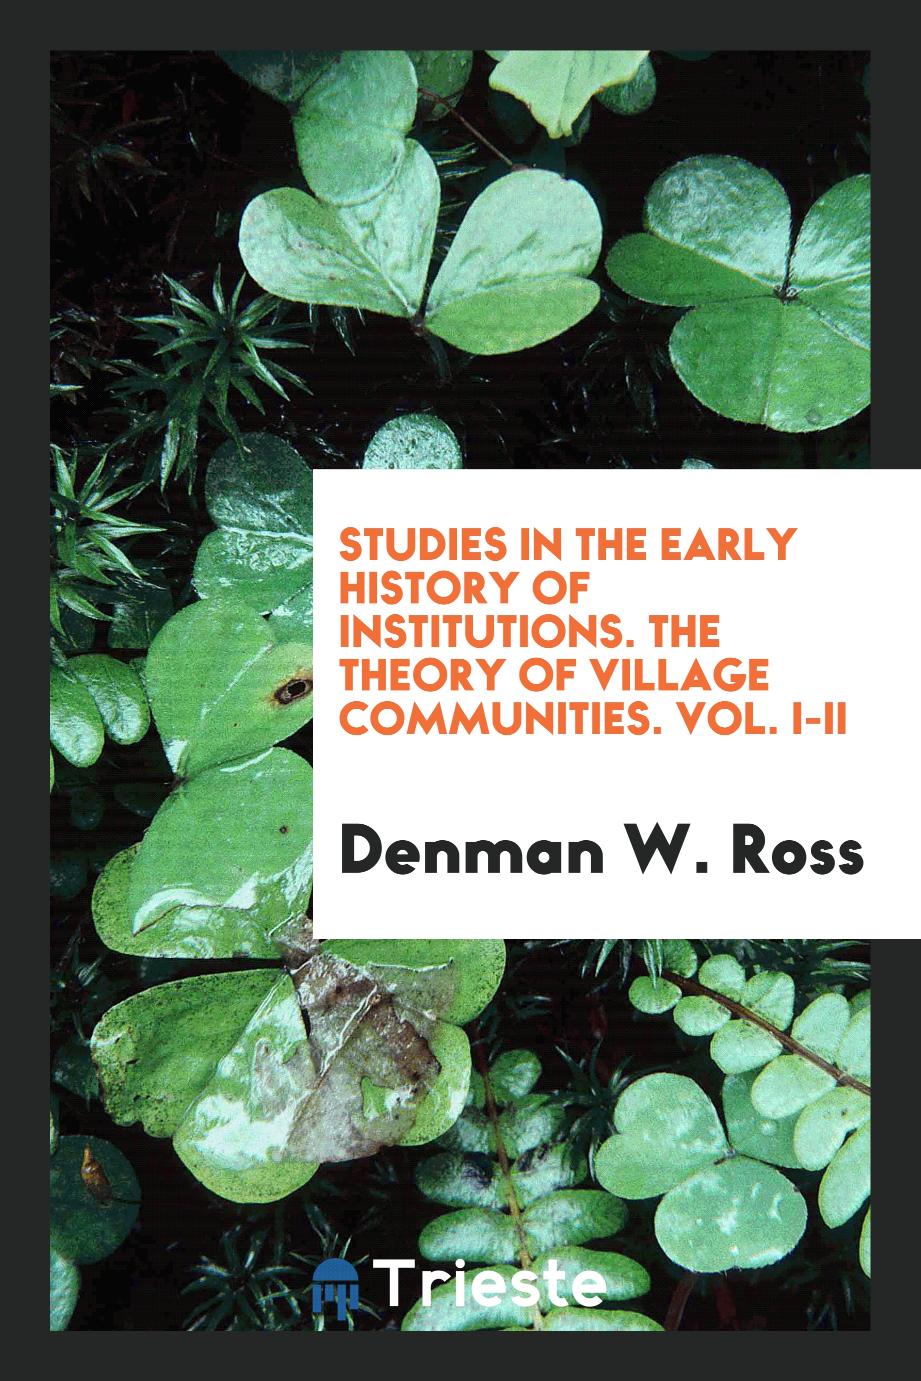 Studies in the Early History of Institutions. The theory of village communities. Vol. I-II